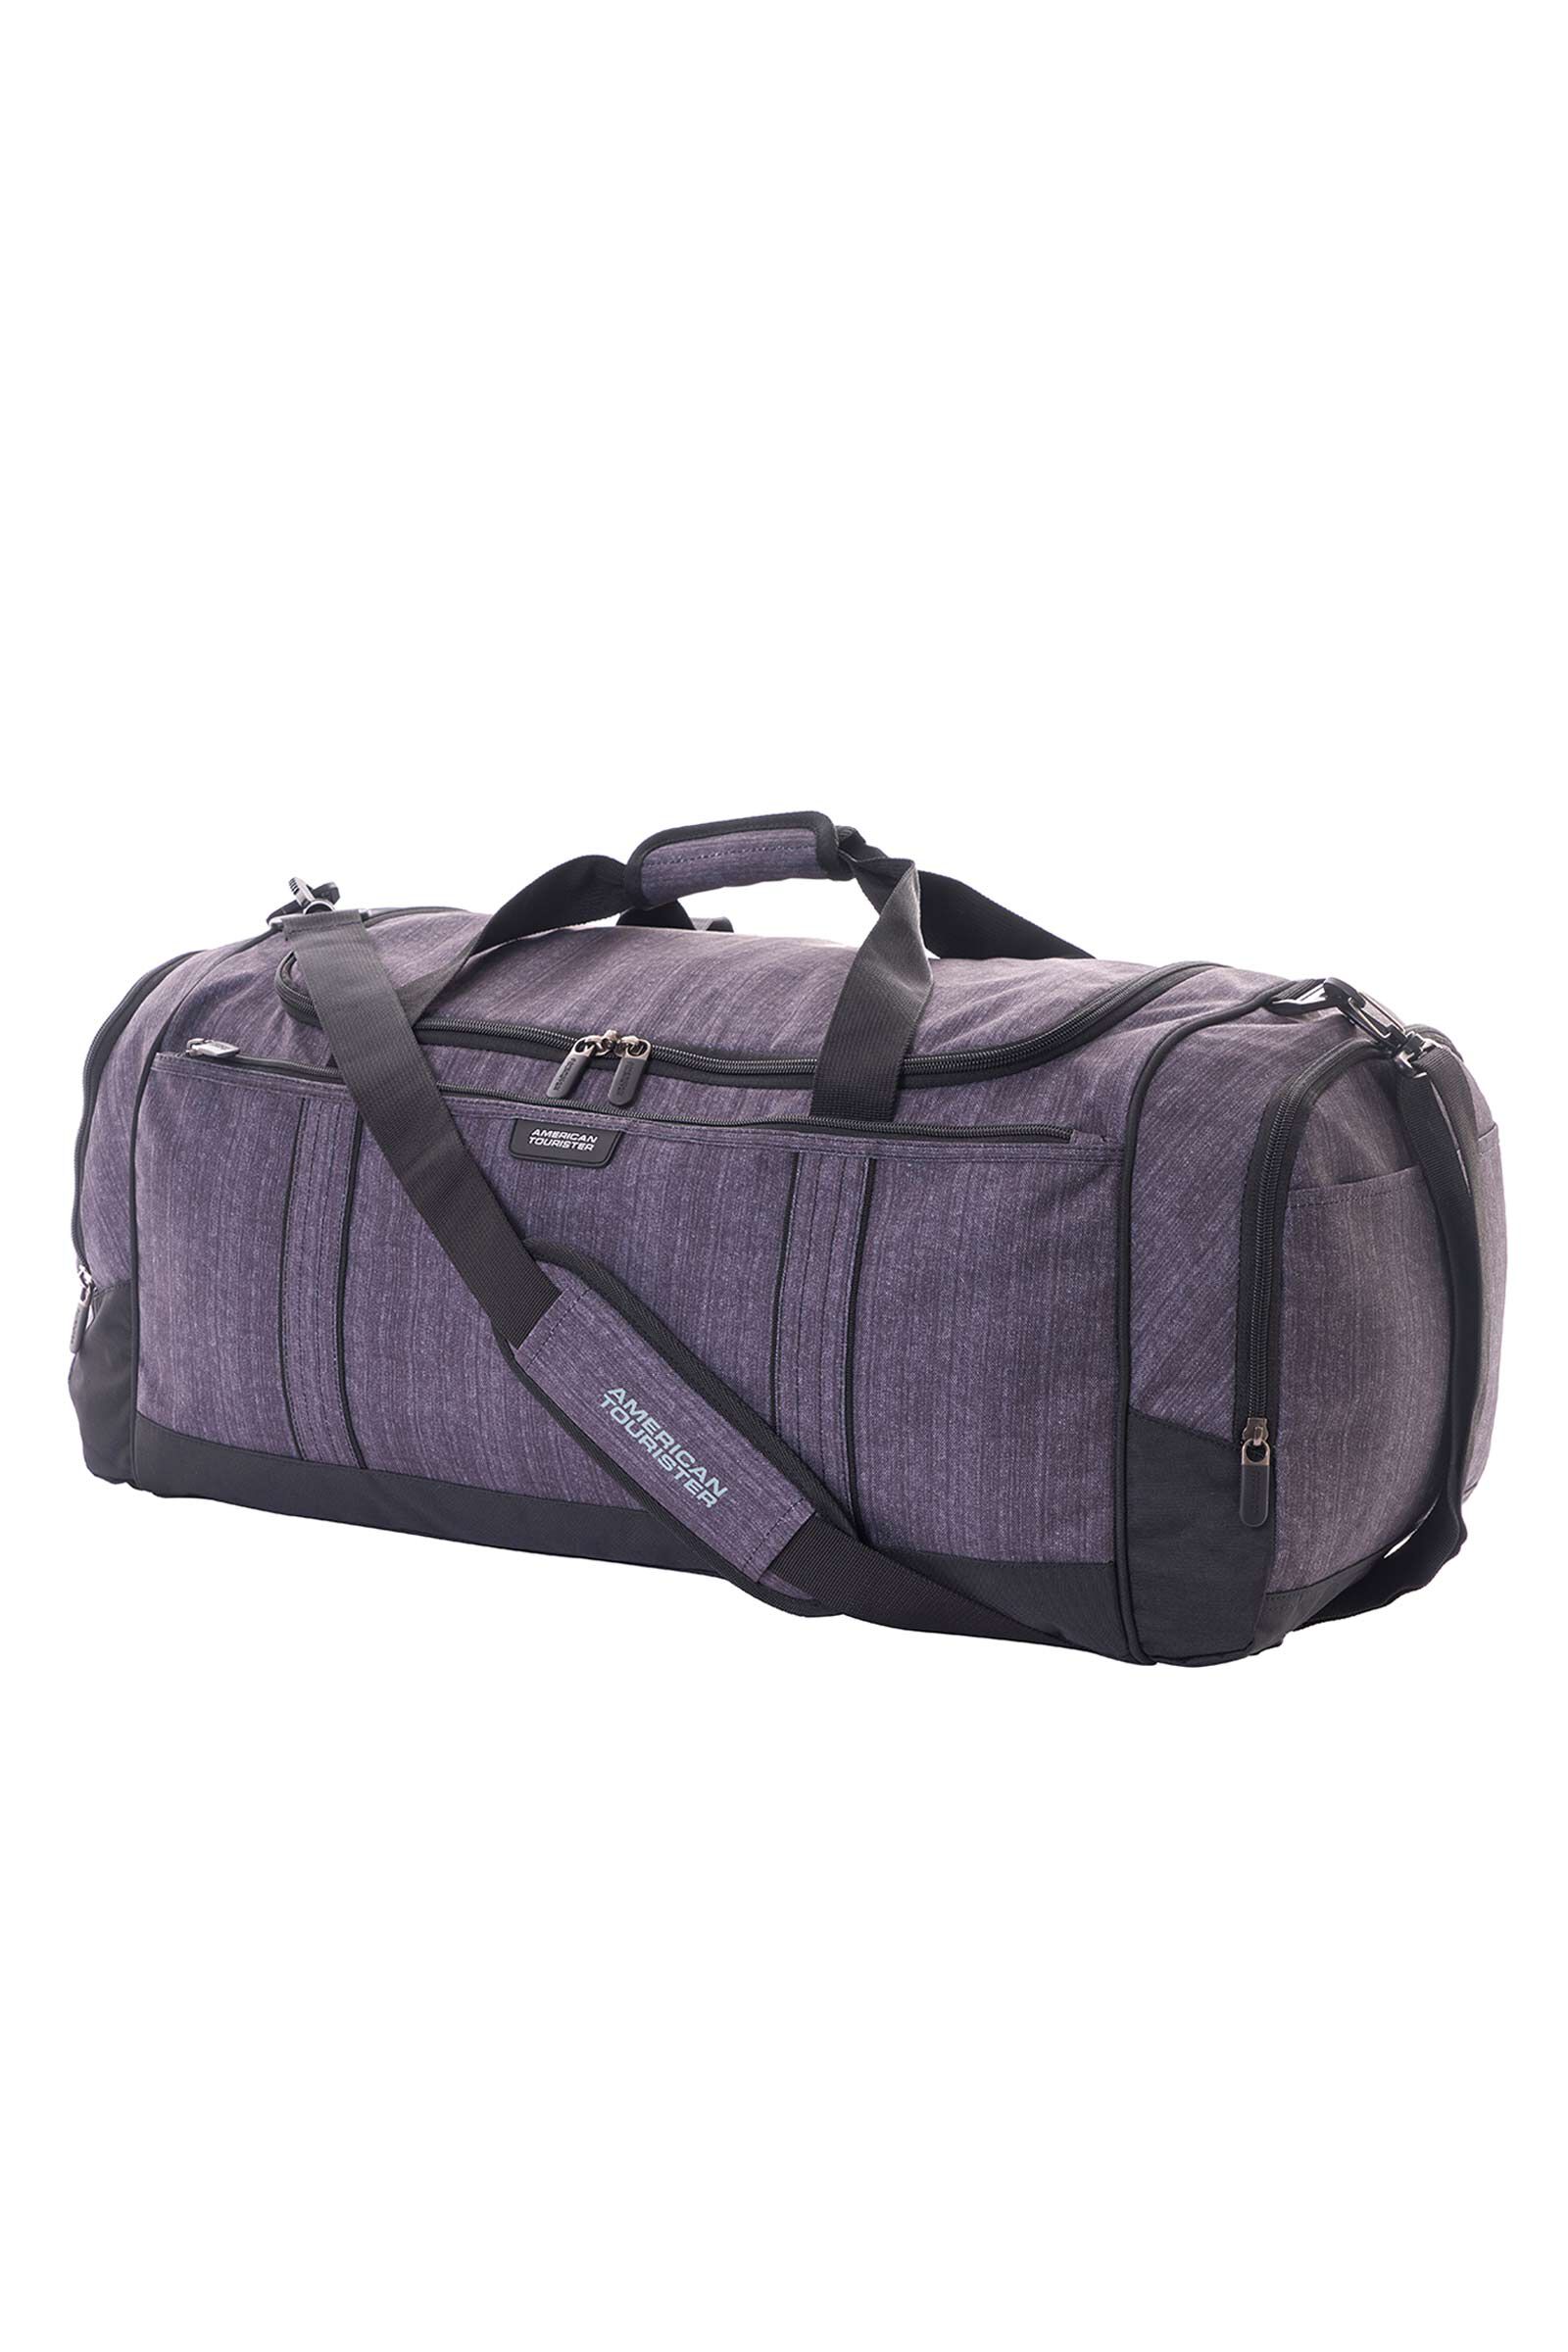 American Tourister Bags & Wallets 50% to 75% off from Rs. 517- Amazon